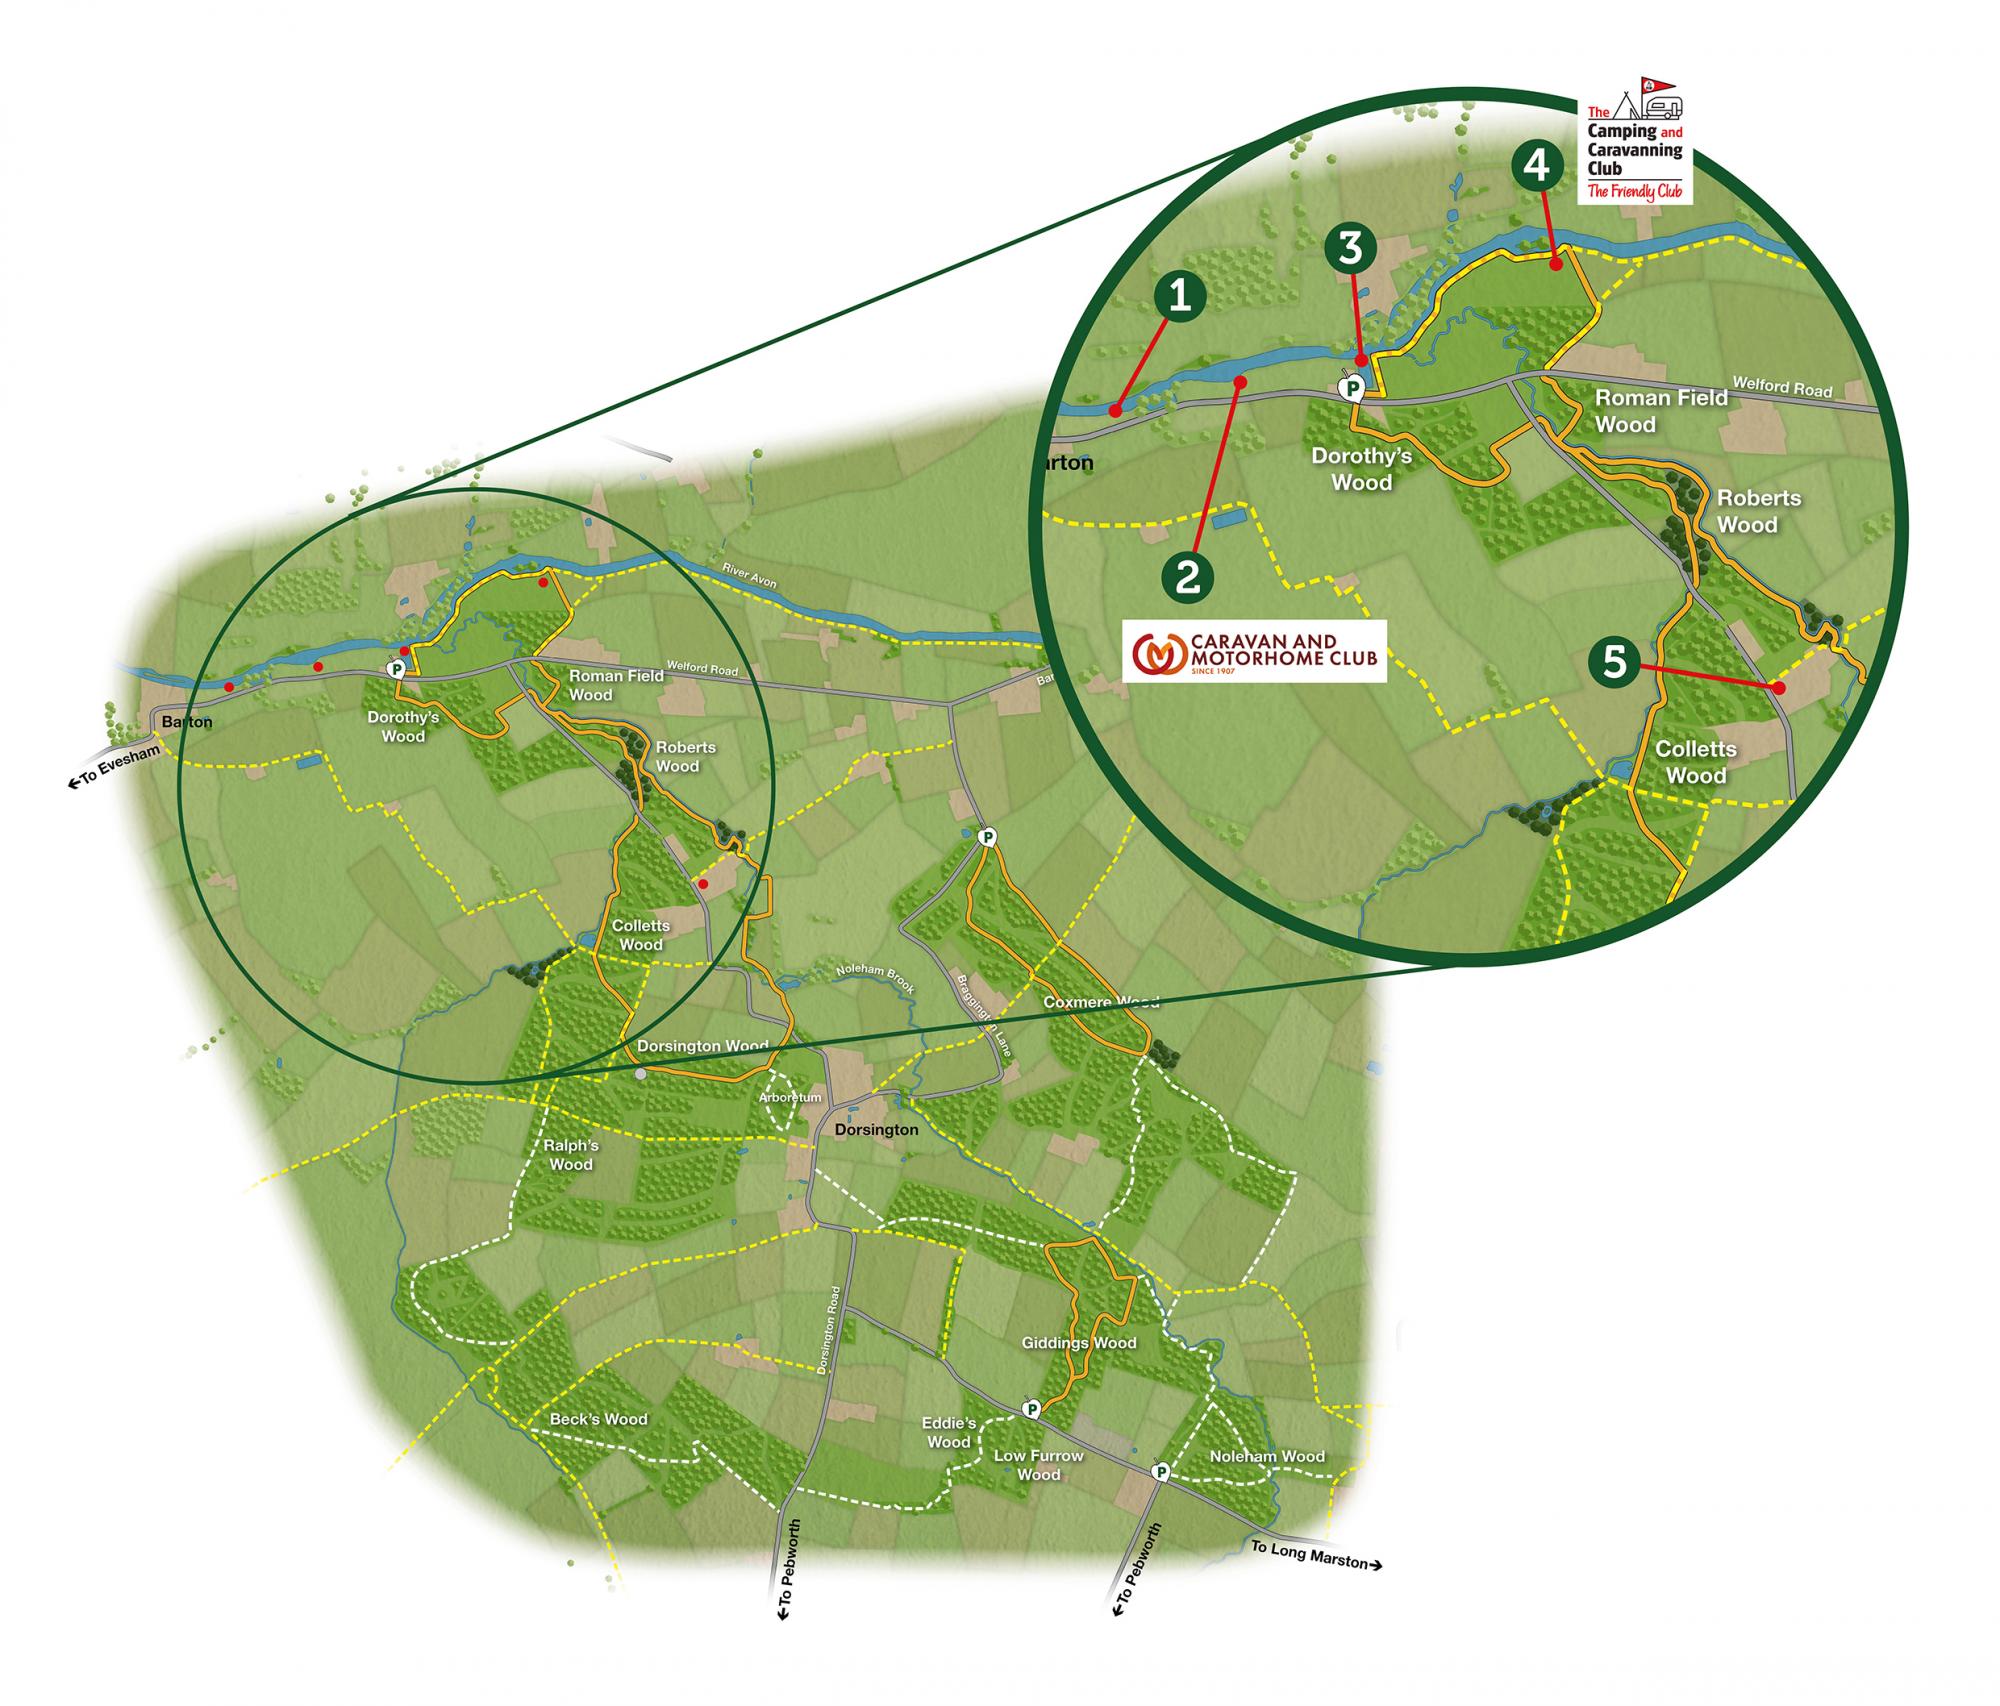 Map of the wider Forest area with a zoomed in section showing the locations of the various places to stay